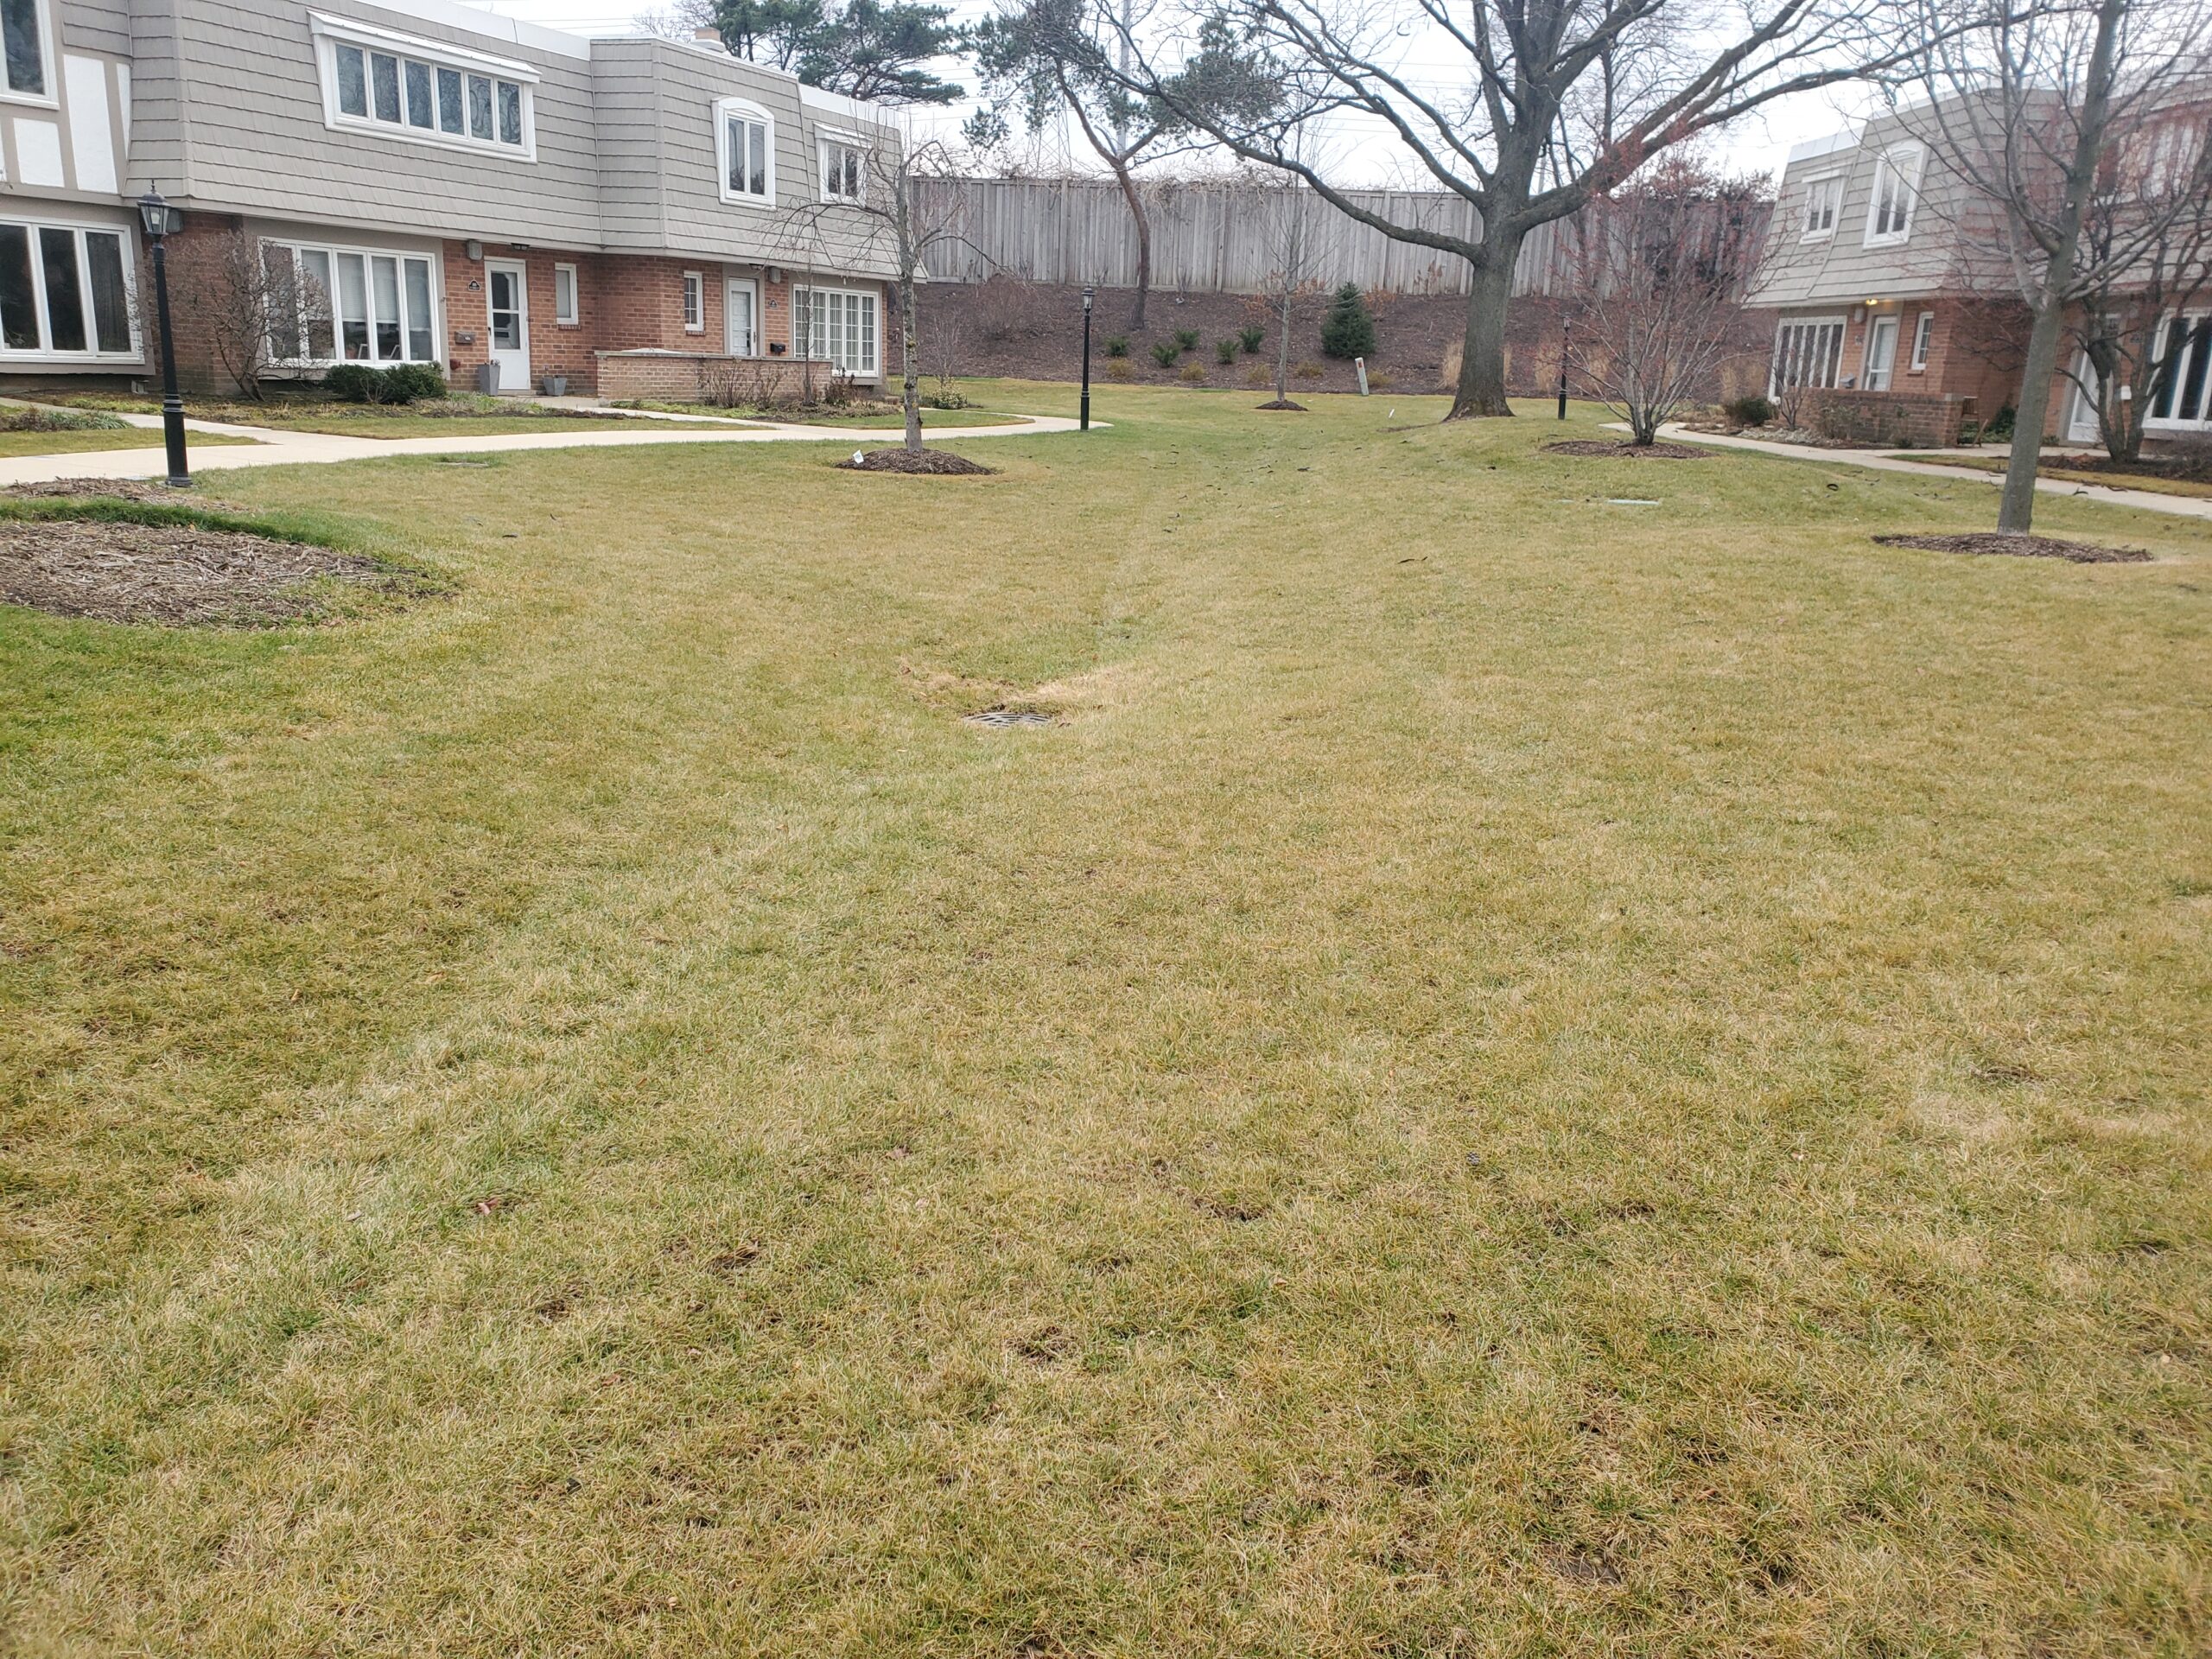 green space of Chantilly Townhouse community that had proper stormwater drainage design installed with view of stormwater drain in center of backyard